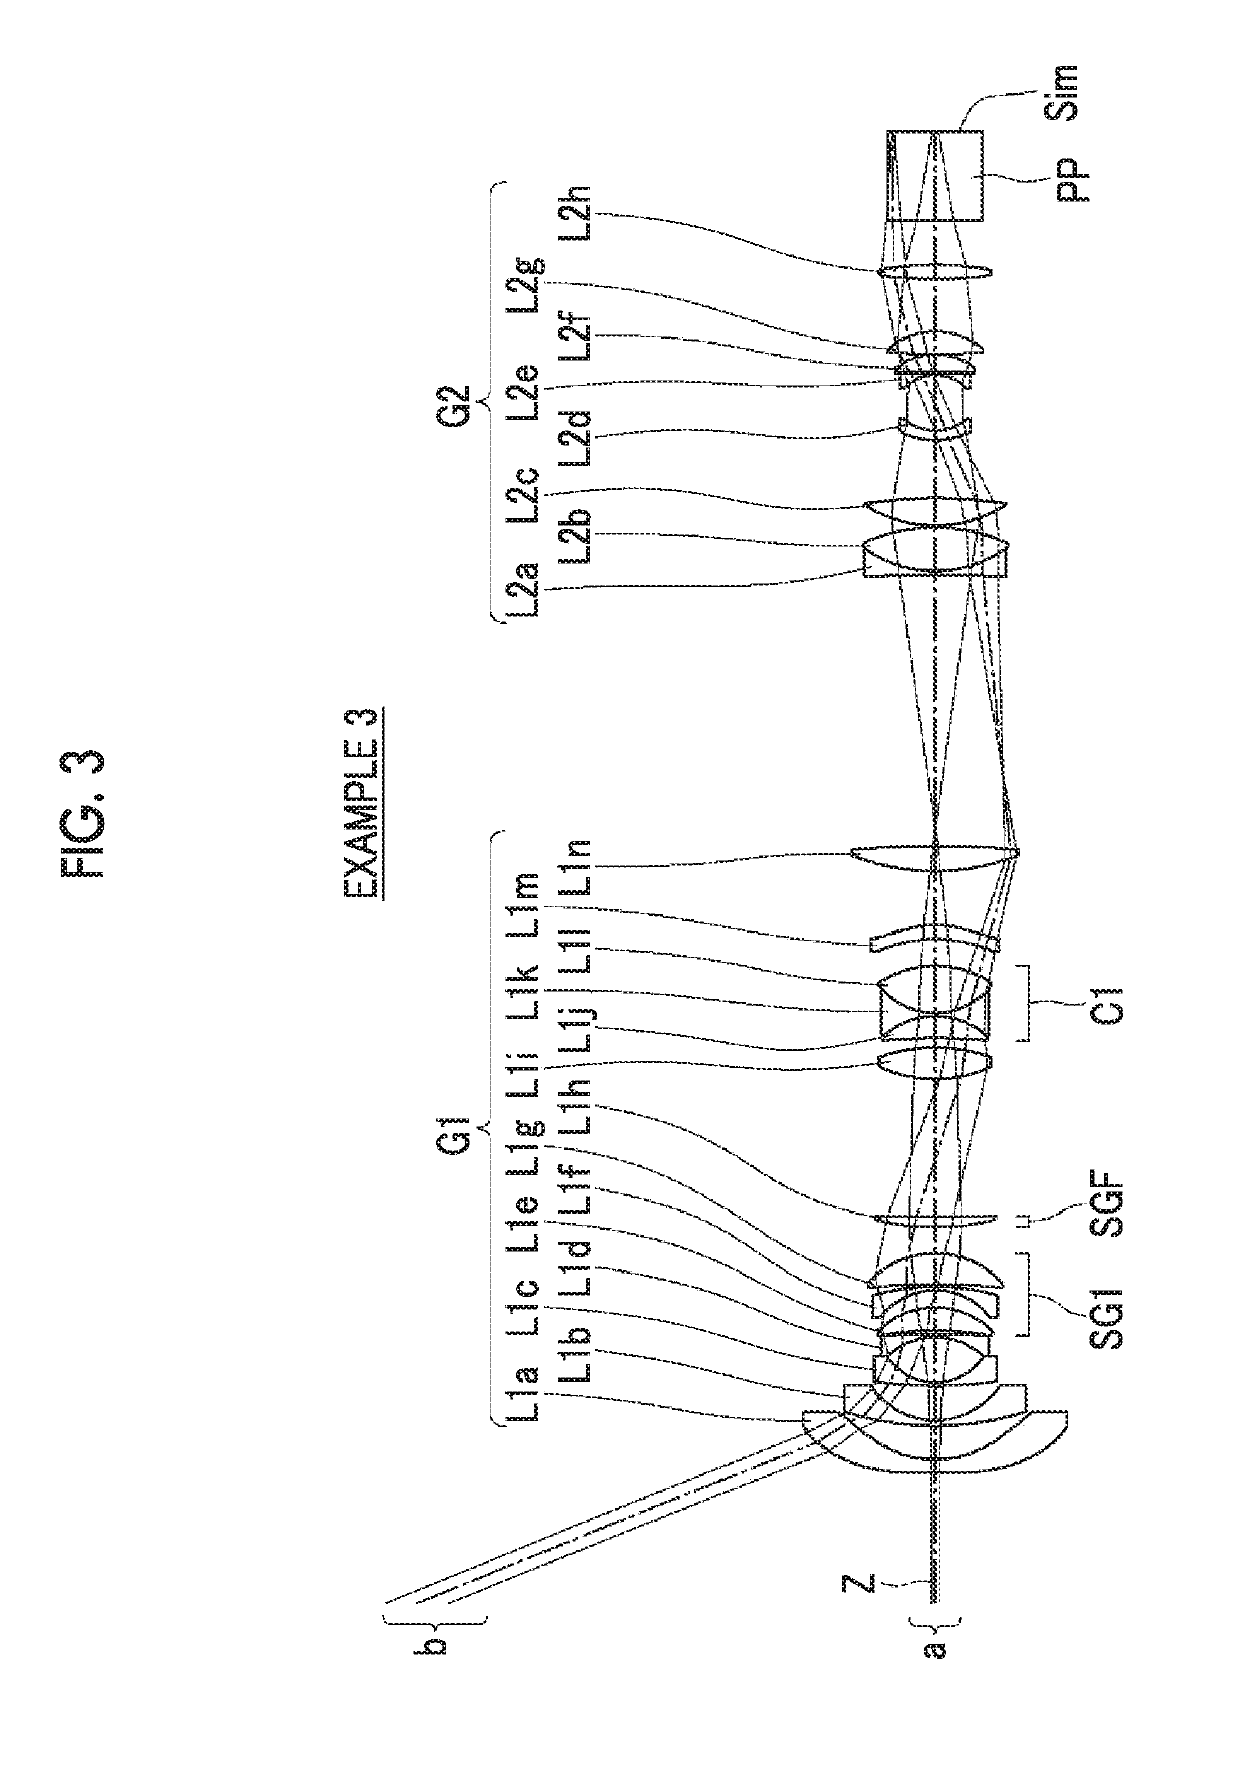 Imaging lens, projection-type display apparatus, and imaging apparatus